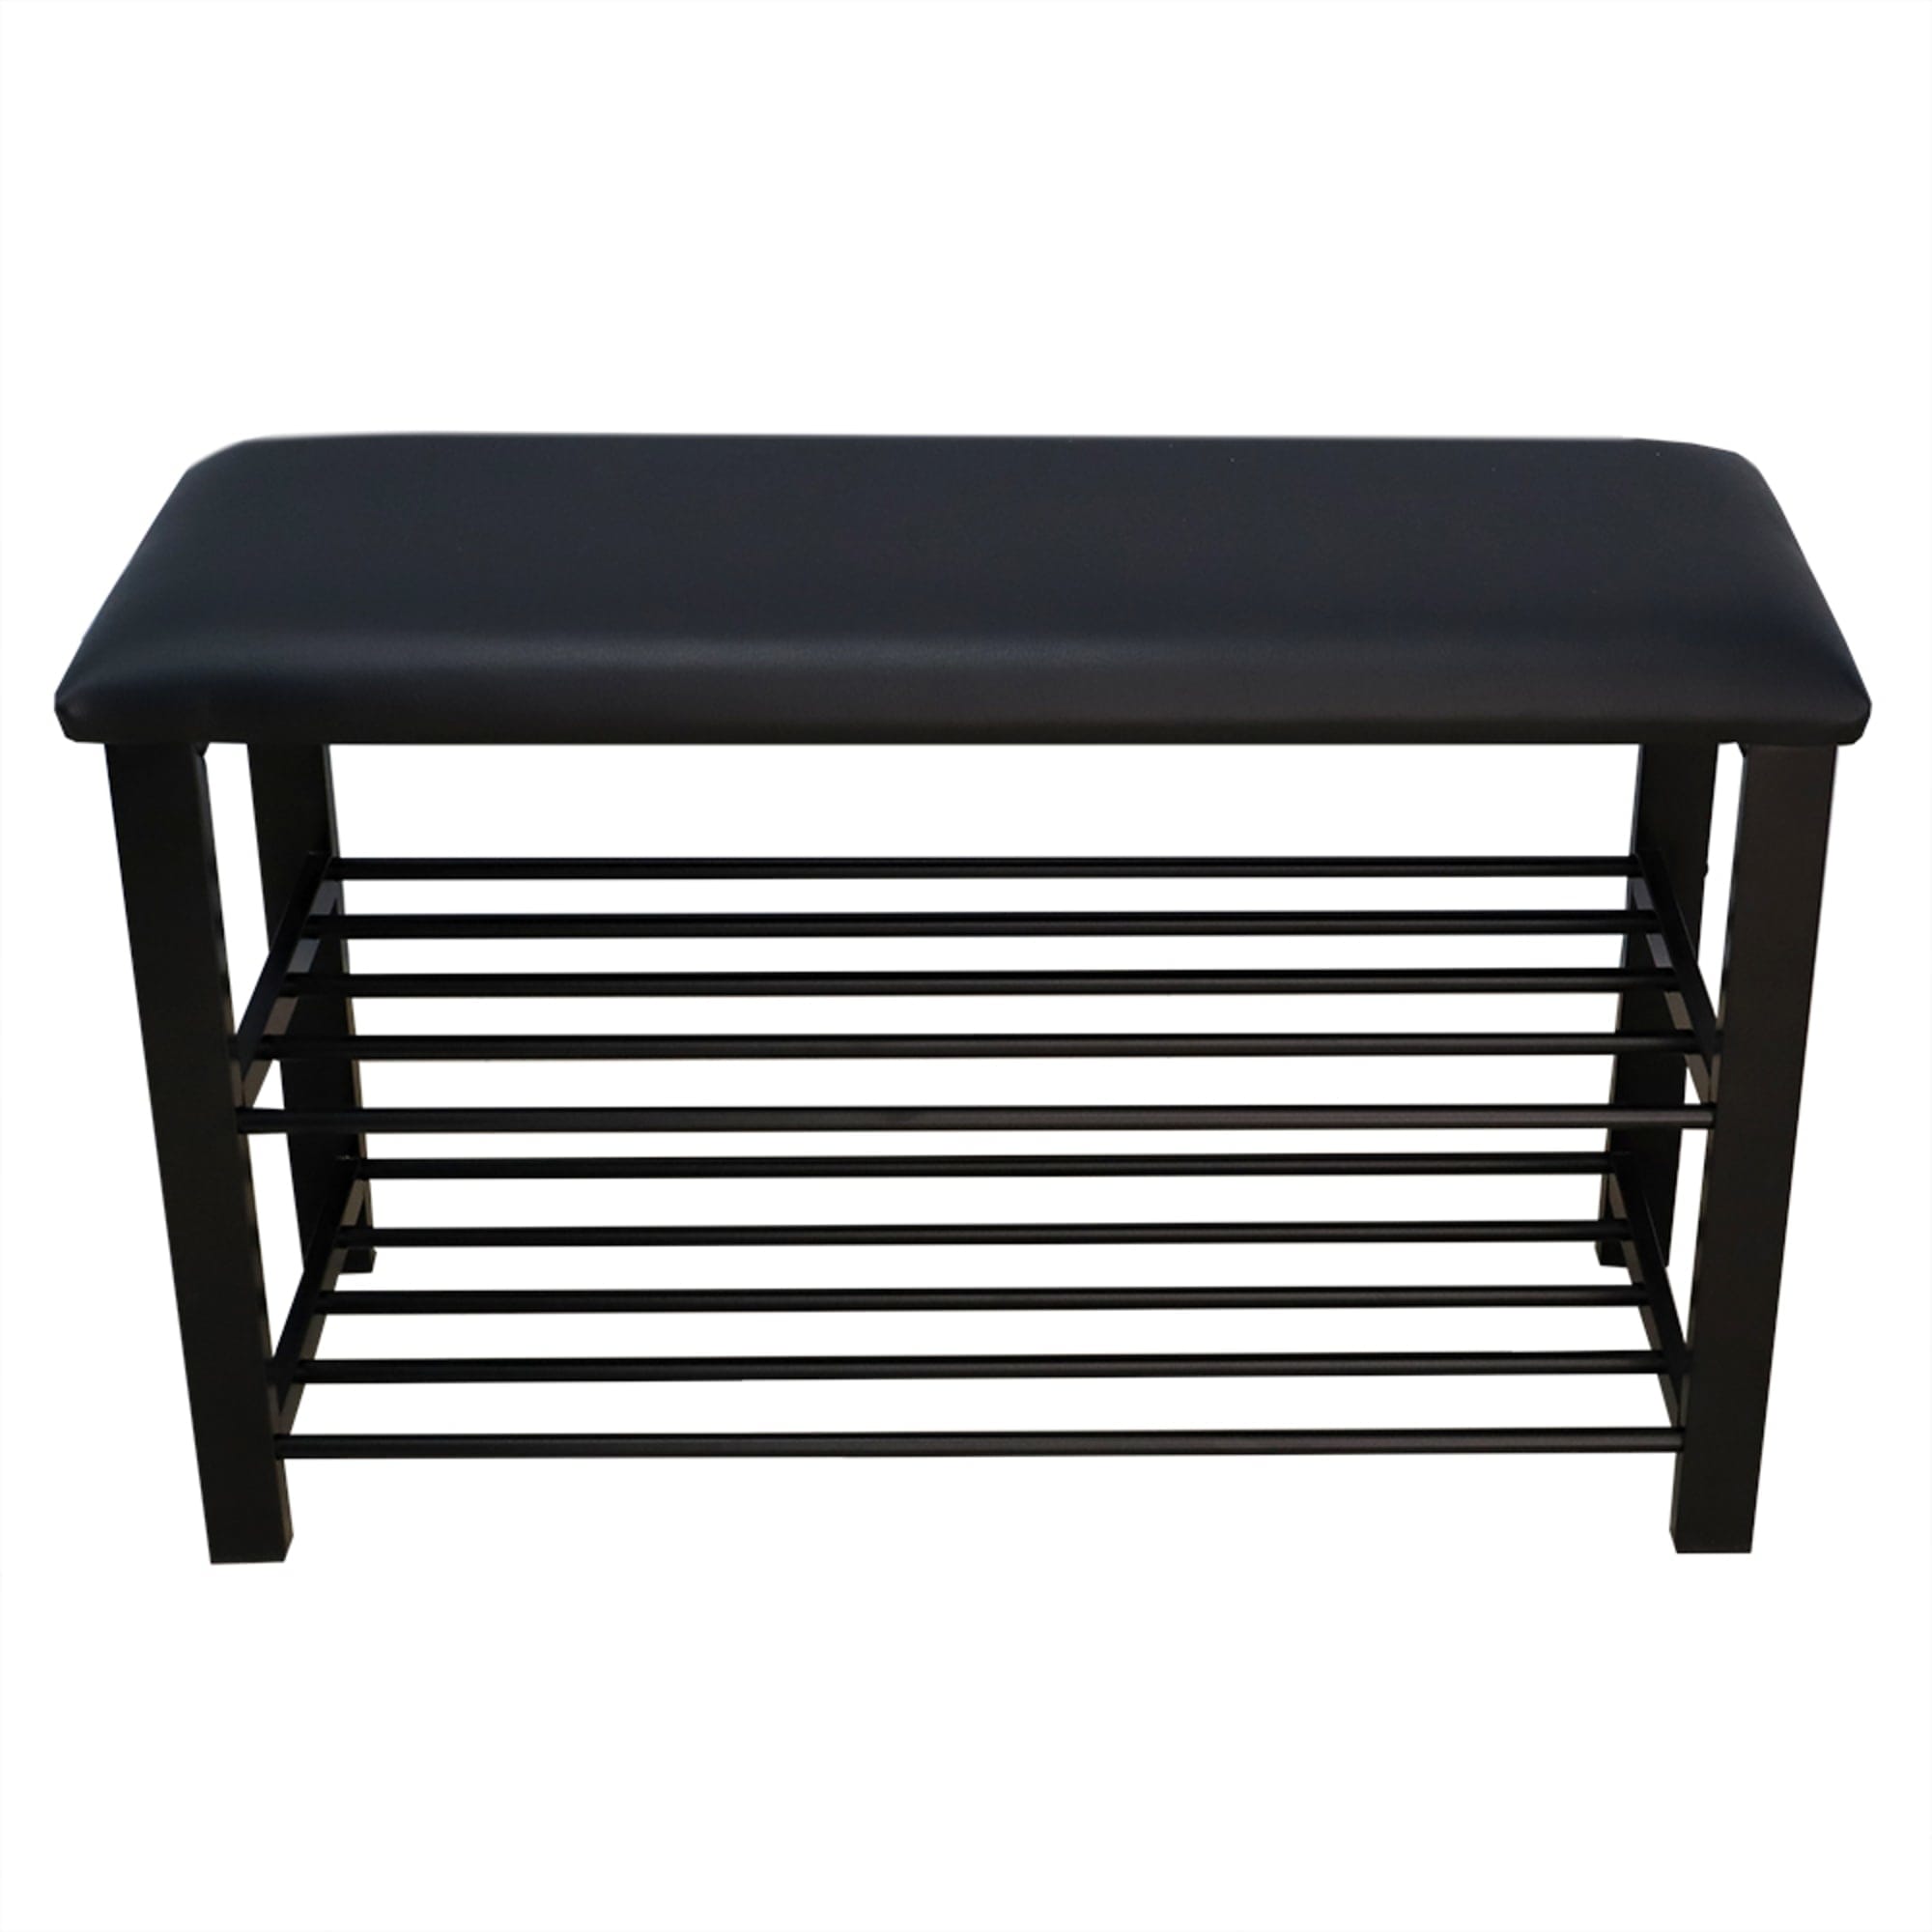 Home Basics Cushioned Storage Bench with 2 Tier Steel Shoe Rack, Black $40.00 EACH, CASE PACK OF 1